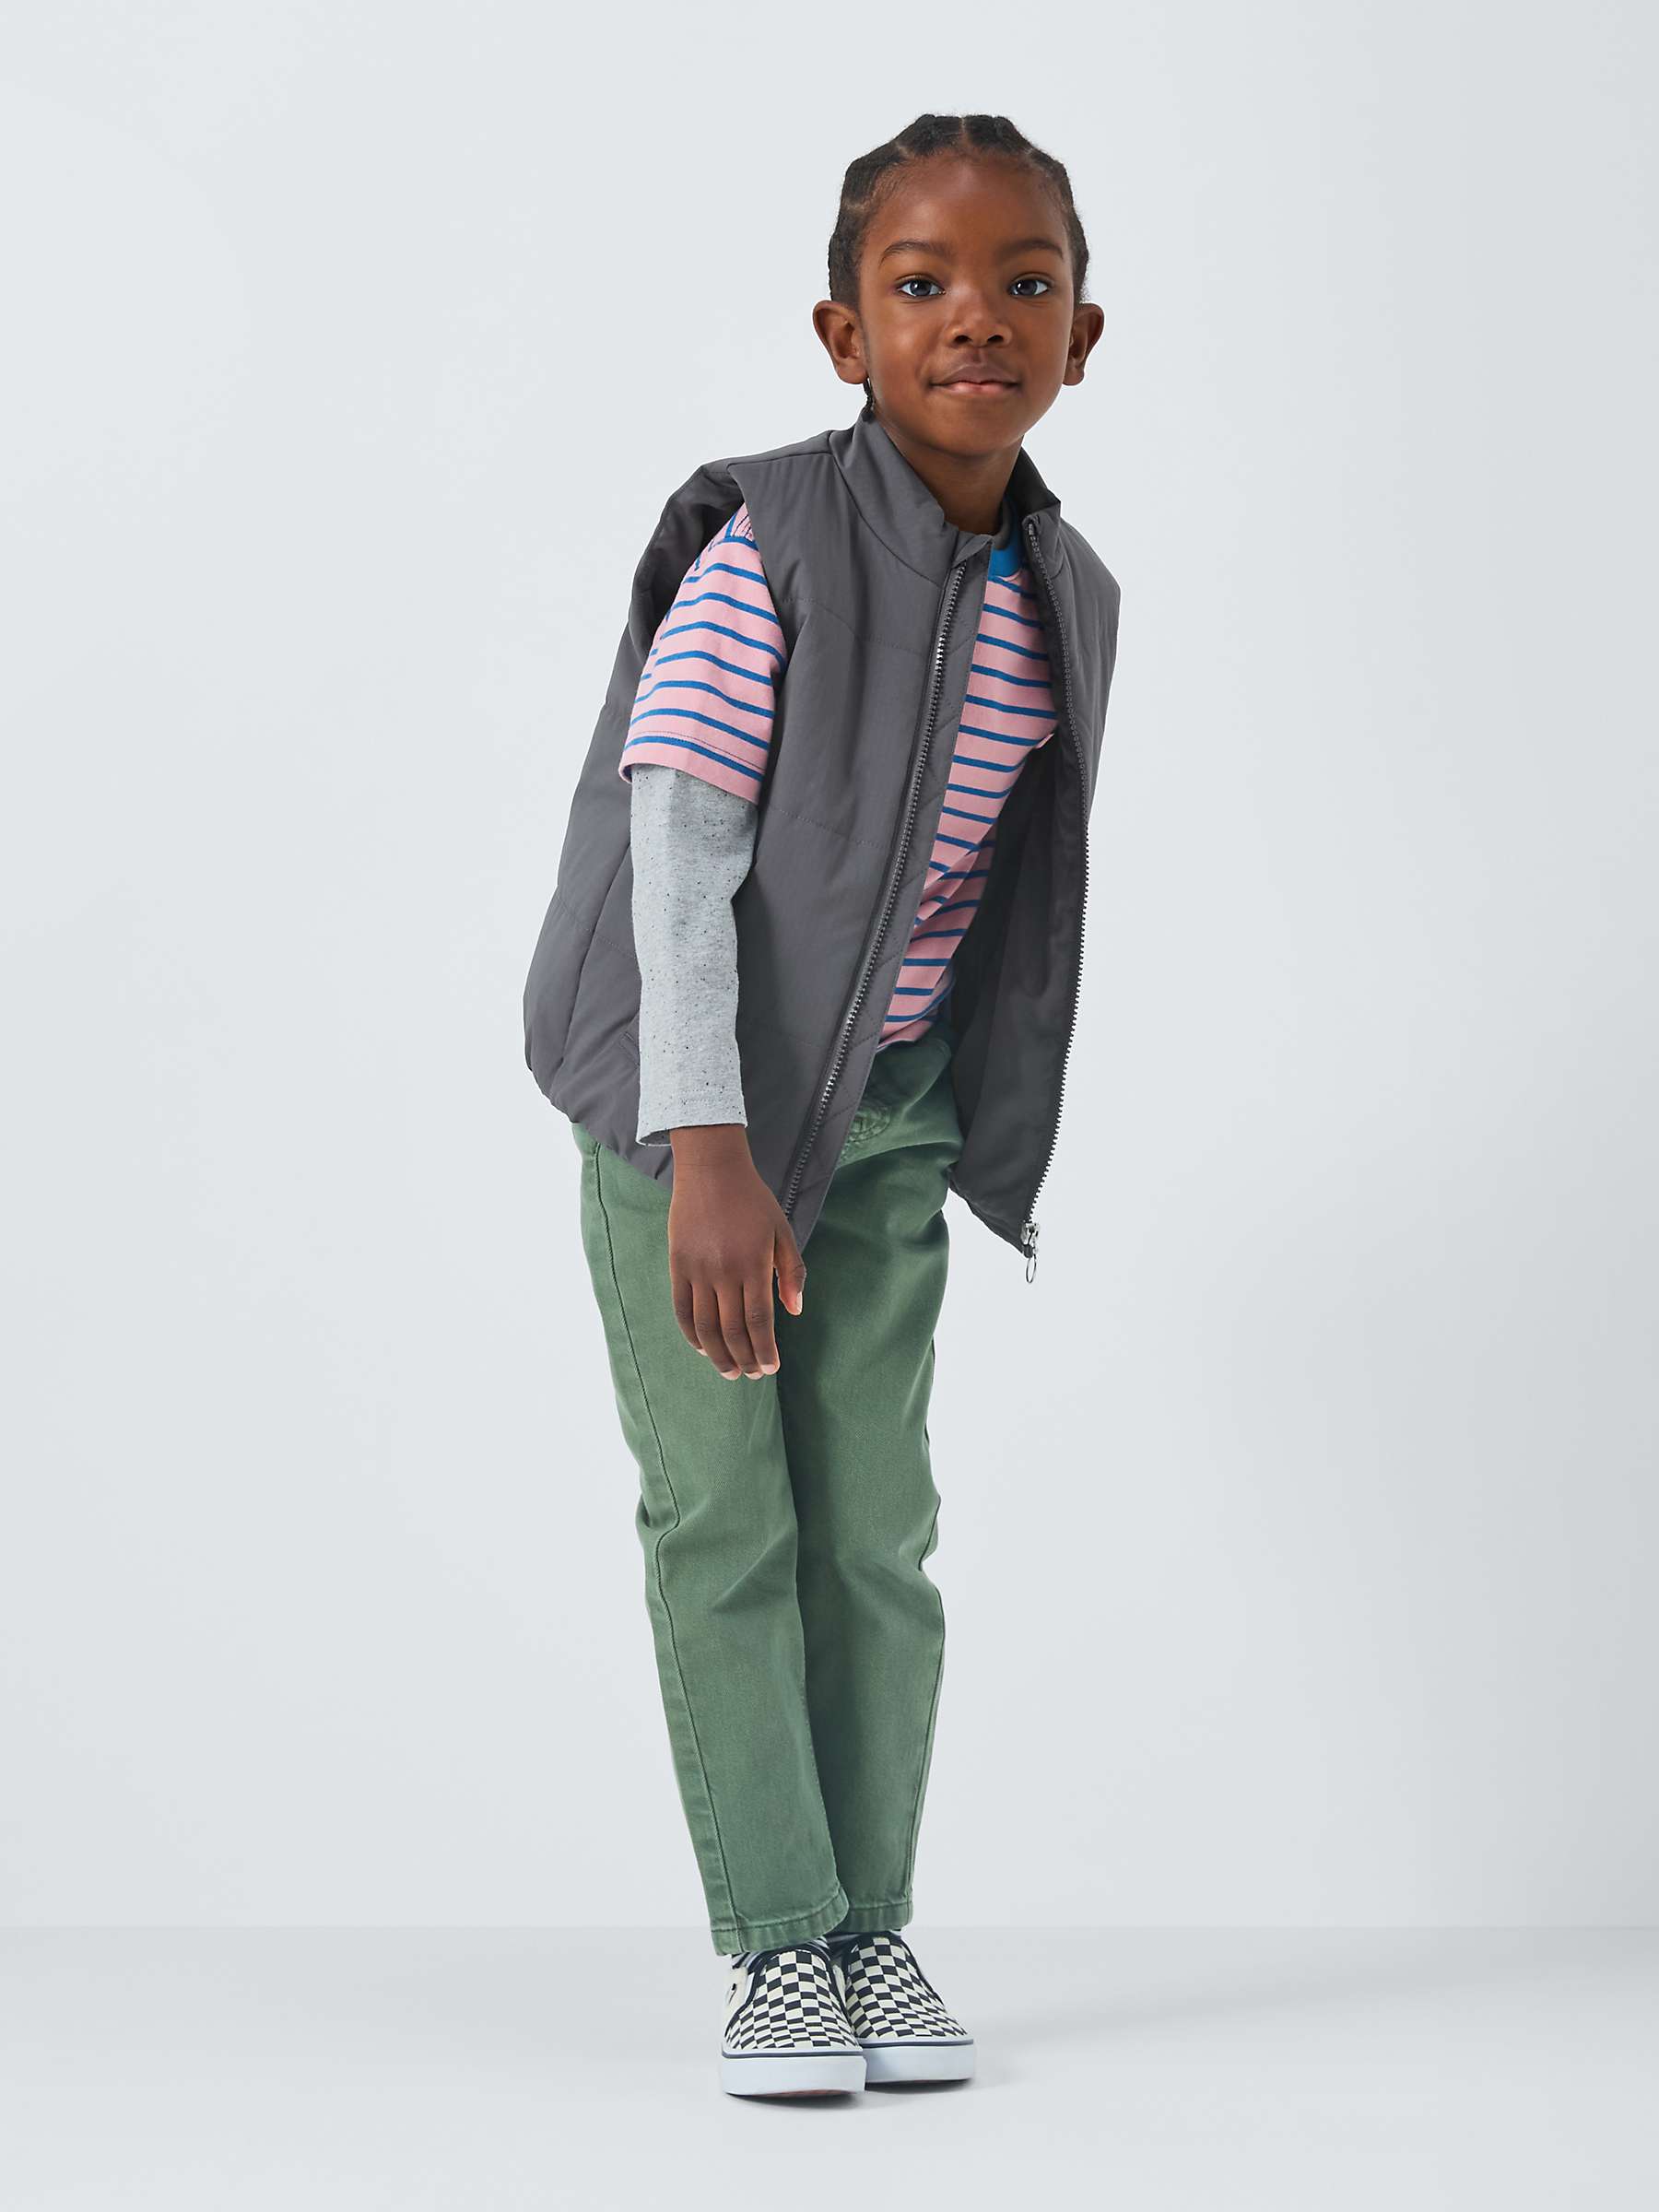 Buy John Lewis Kids' Quilted Shower Resistant Ripstop Gilet, Charcoal Online at johnlewis.com